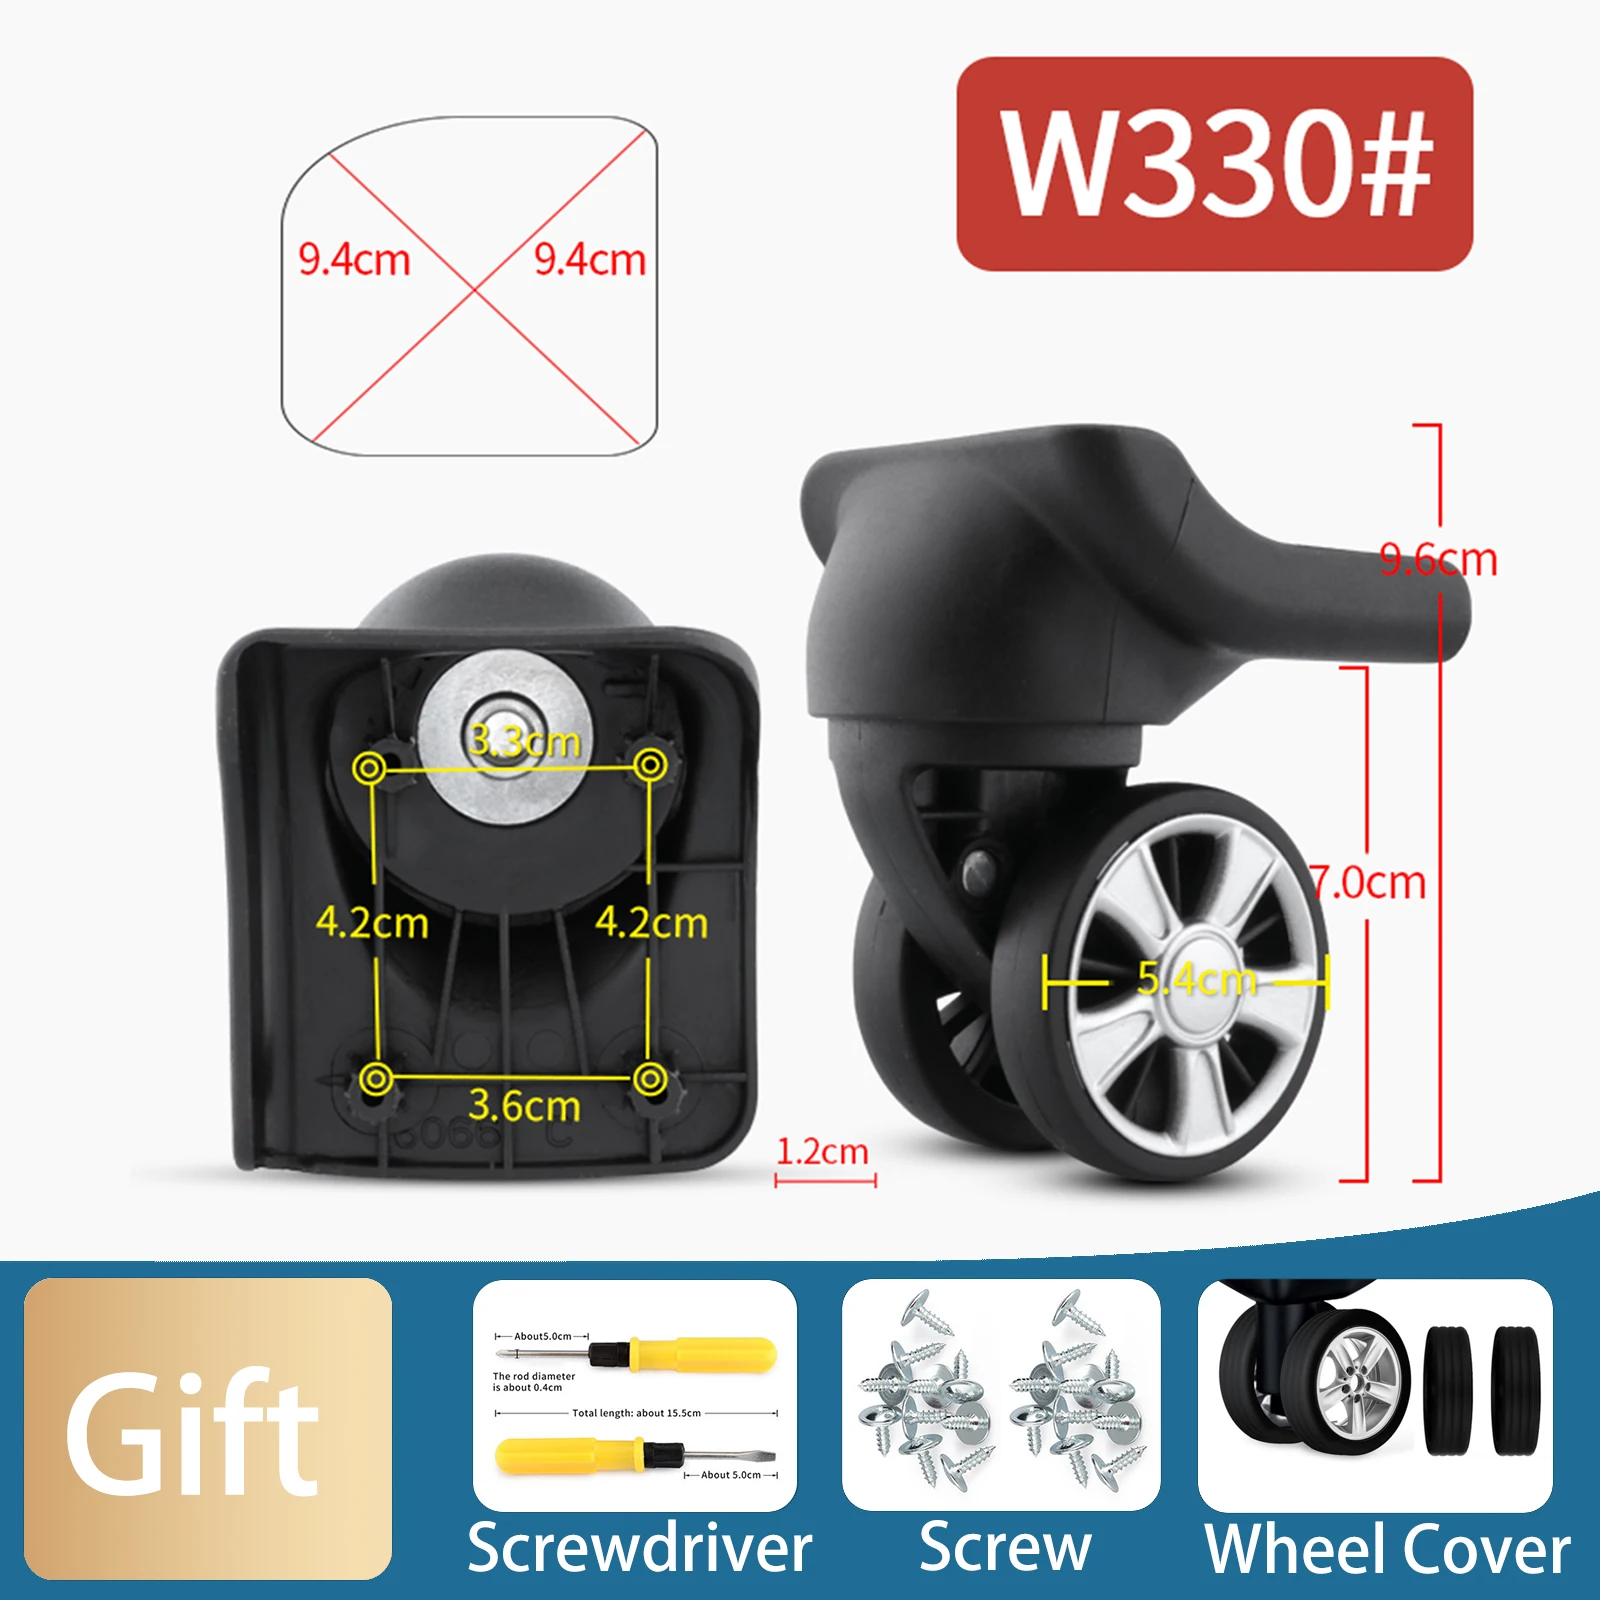 W330 Luggage Left & Right Wheel Easy To Carry Trolley Suitcase Casters Accessories Universal Travel Suitcase Wheel Suitcase Set